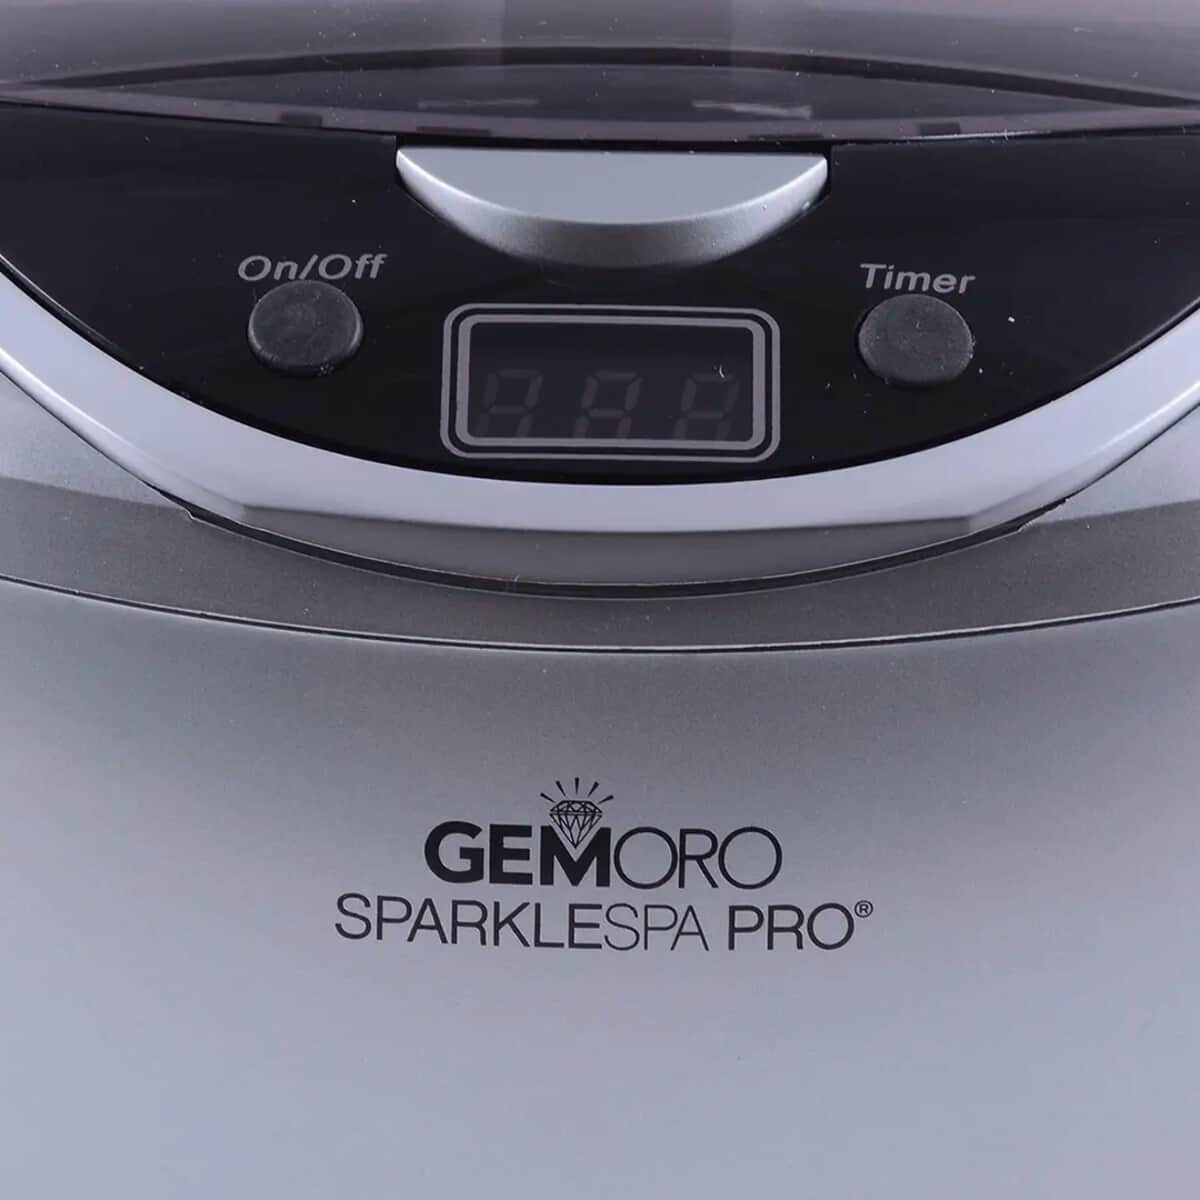 Gemoro Sparkle Spa Pro: Deluxe Personal Ultrasonic Jewelry Cleaner - Grey image number 6